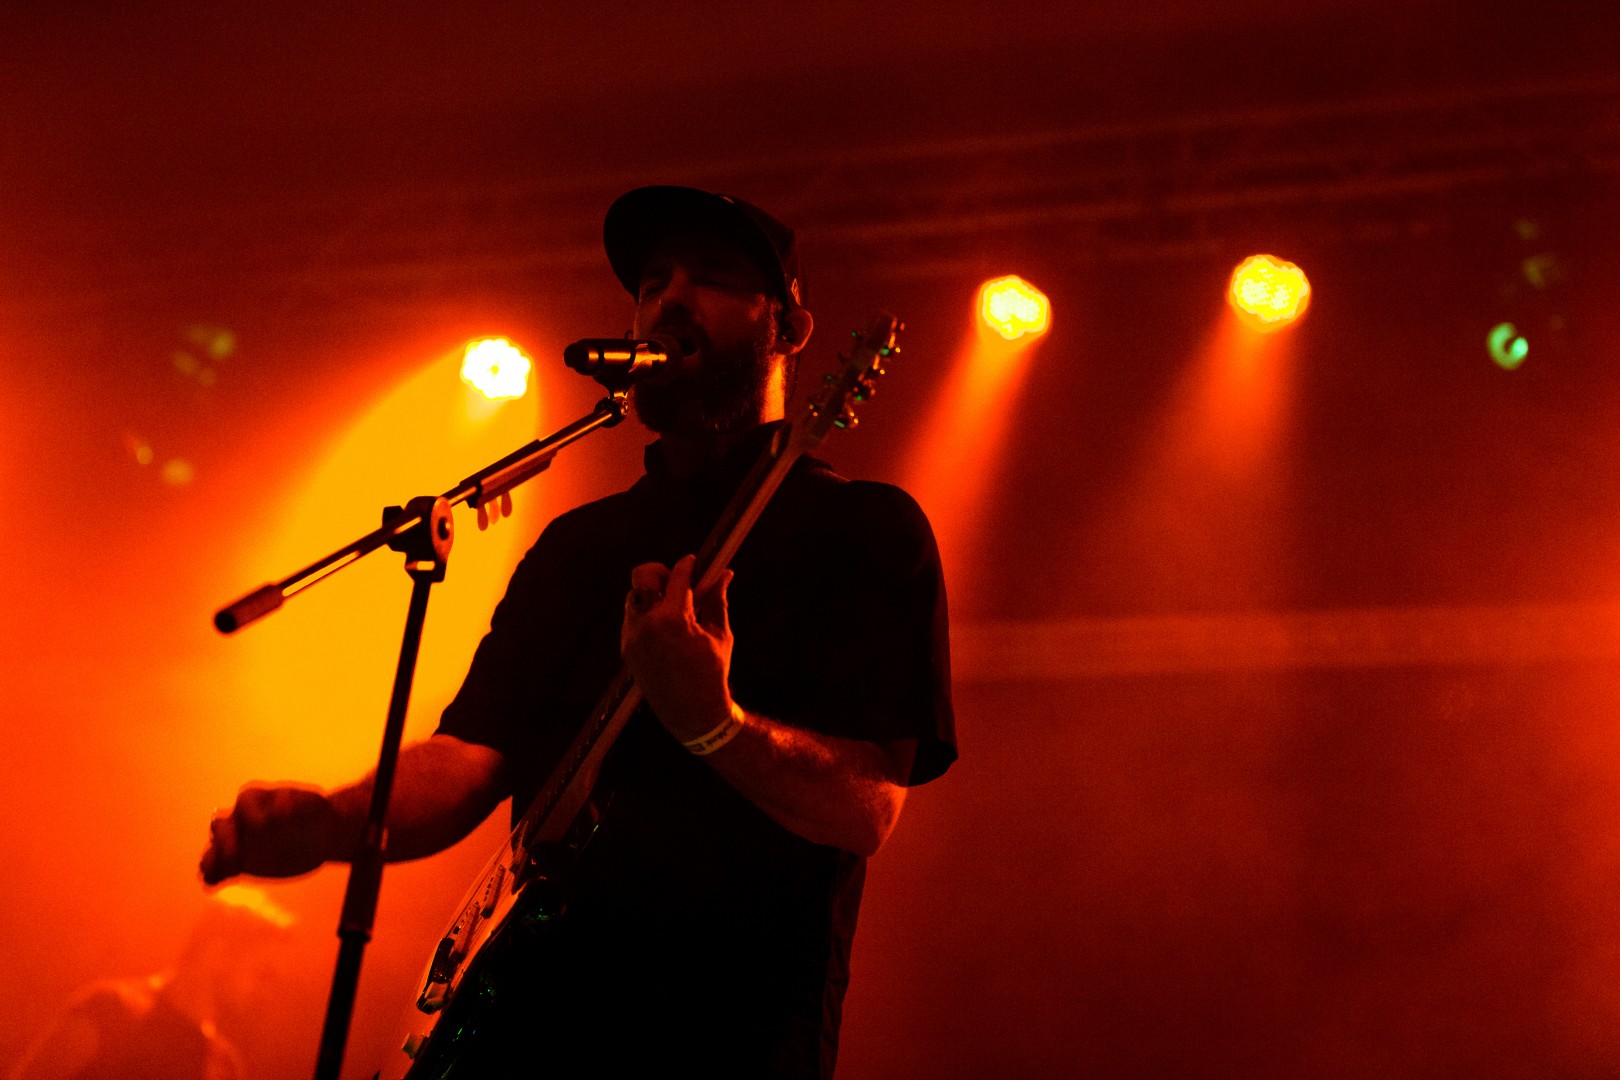 Phantogram at Quantic in Bucharest on March 30, 2017 (5379a8d476)